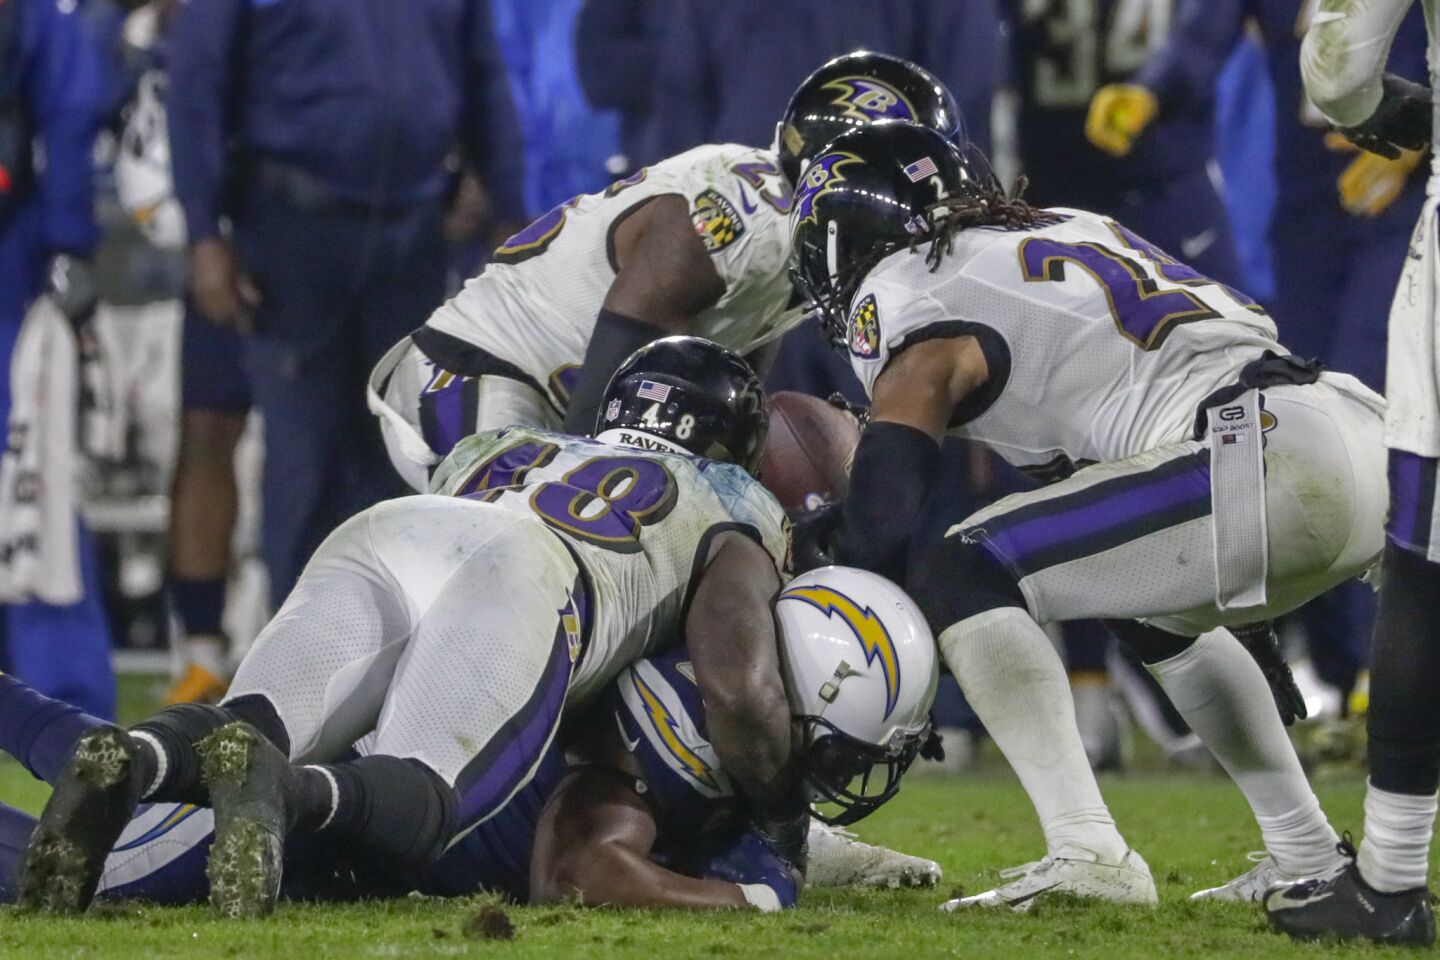 Ravens cornerback Tayvon Young takes the ball from Chargers tight end Antonio Gates and returns it for a touchdown late in the fourth quarter at StubHub Center.